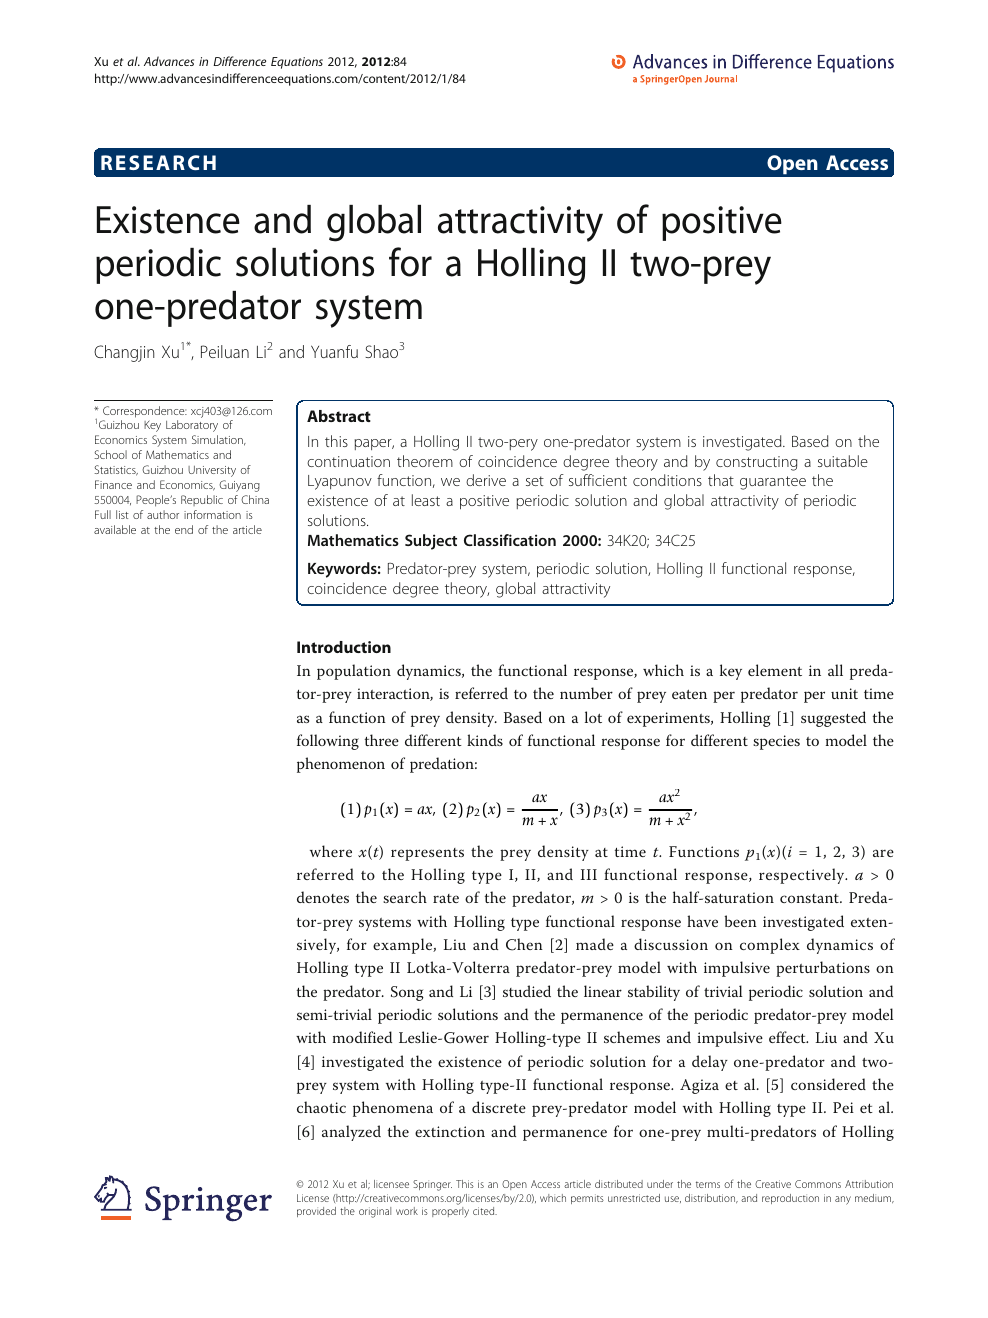 Existence And Global Attractivity Of Positive Periodic Solutions For A Holling Ii Two Prey One Predator System Topic Of Research Paper In Mathematics Download Scholarly Article Pdf And Read For Free On Cyberleninka